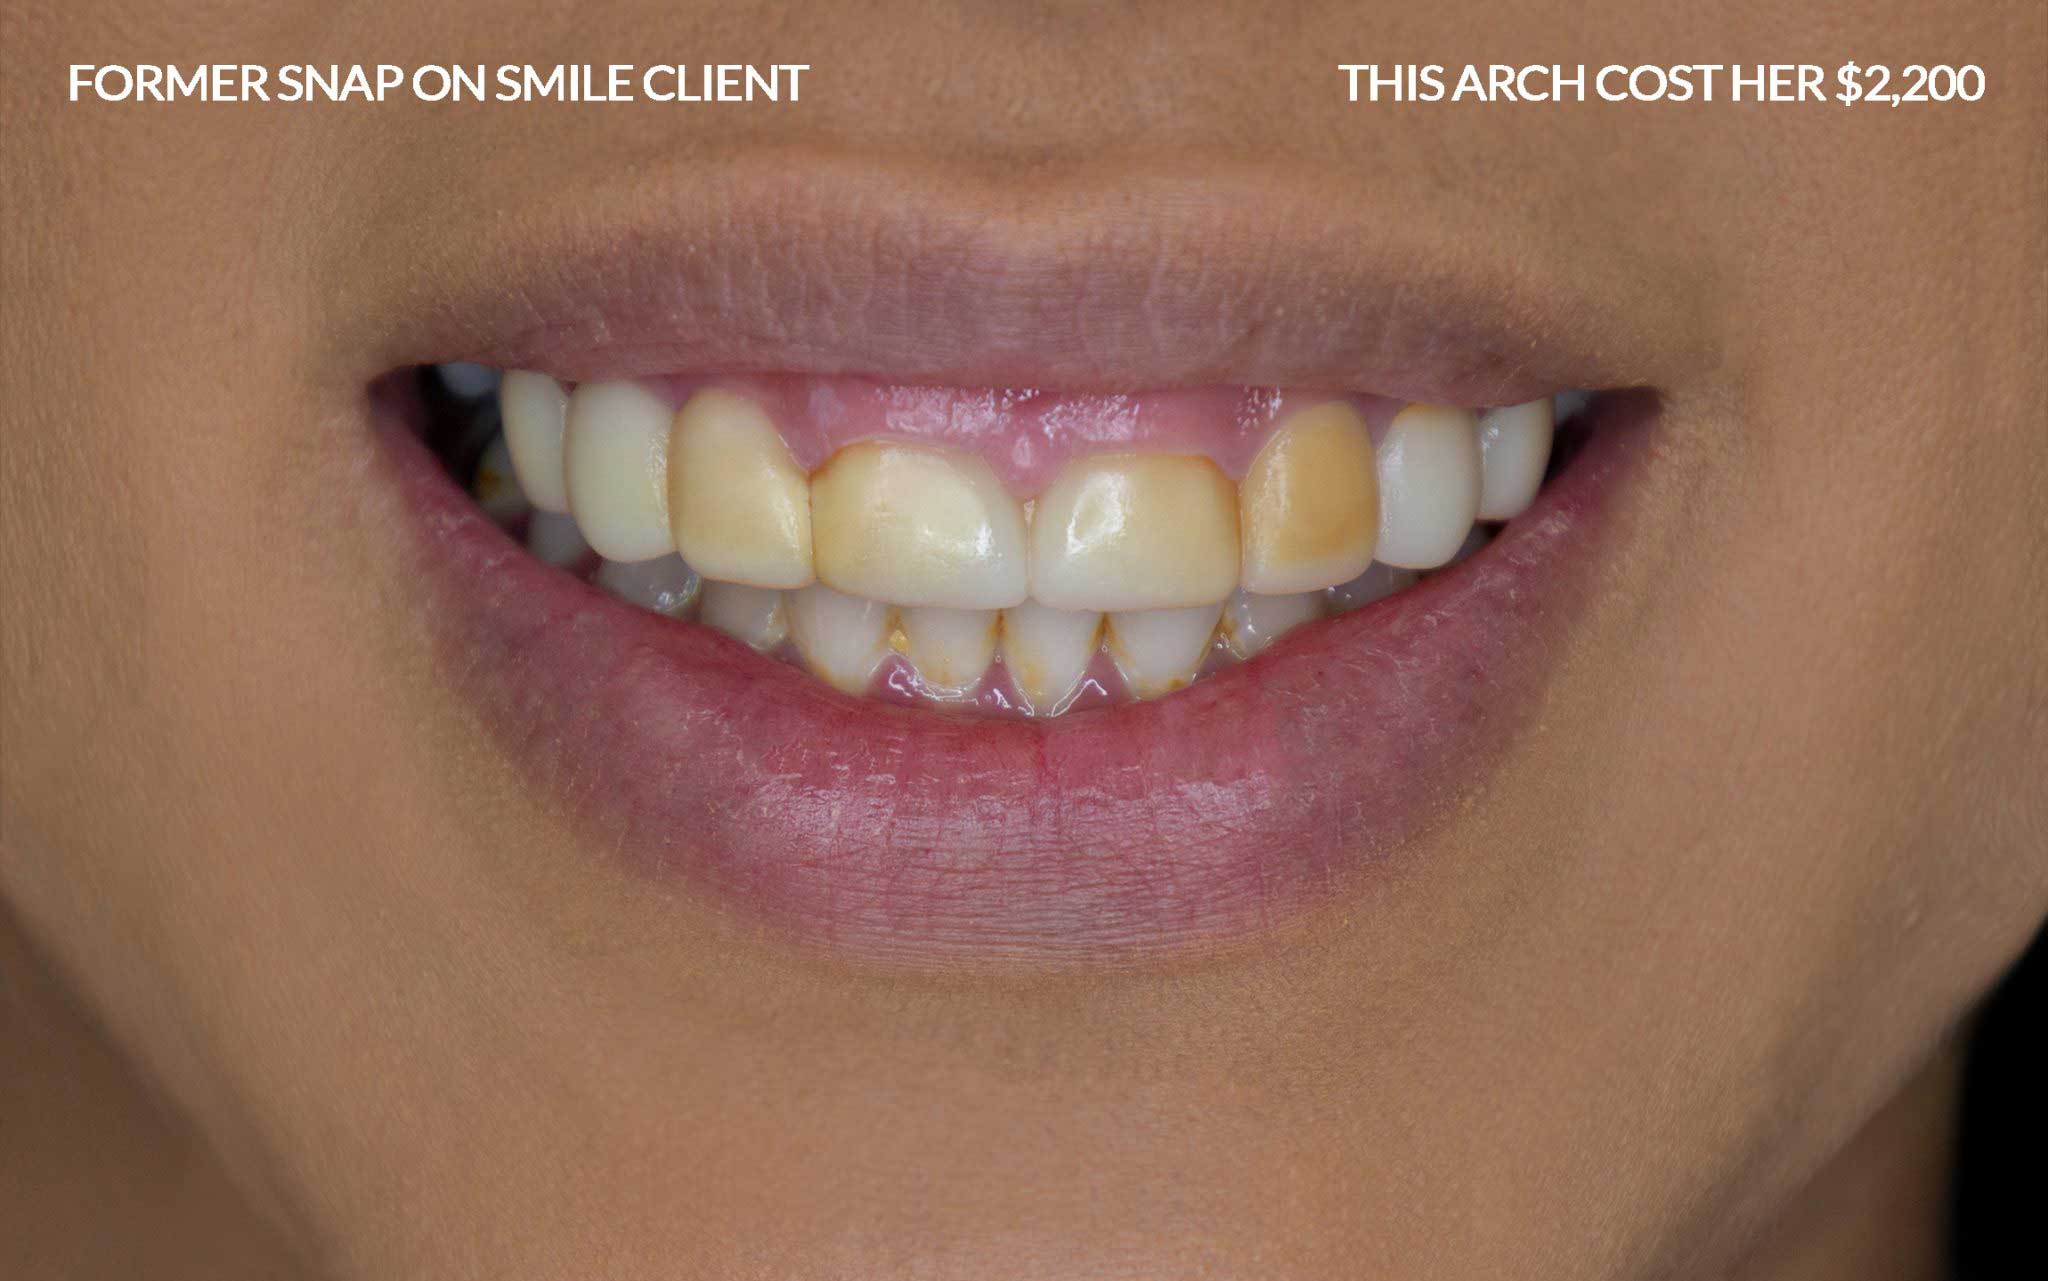 Client wearing Snap-On Smile removable veneers